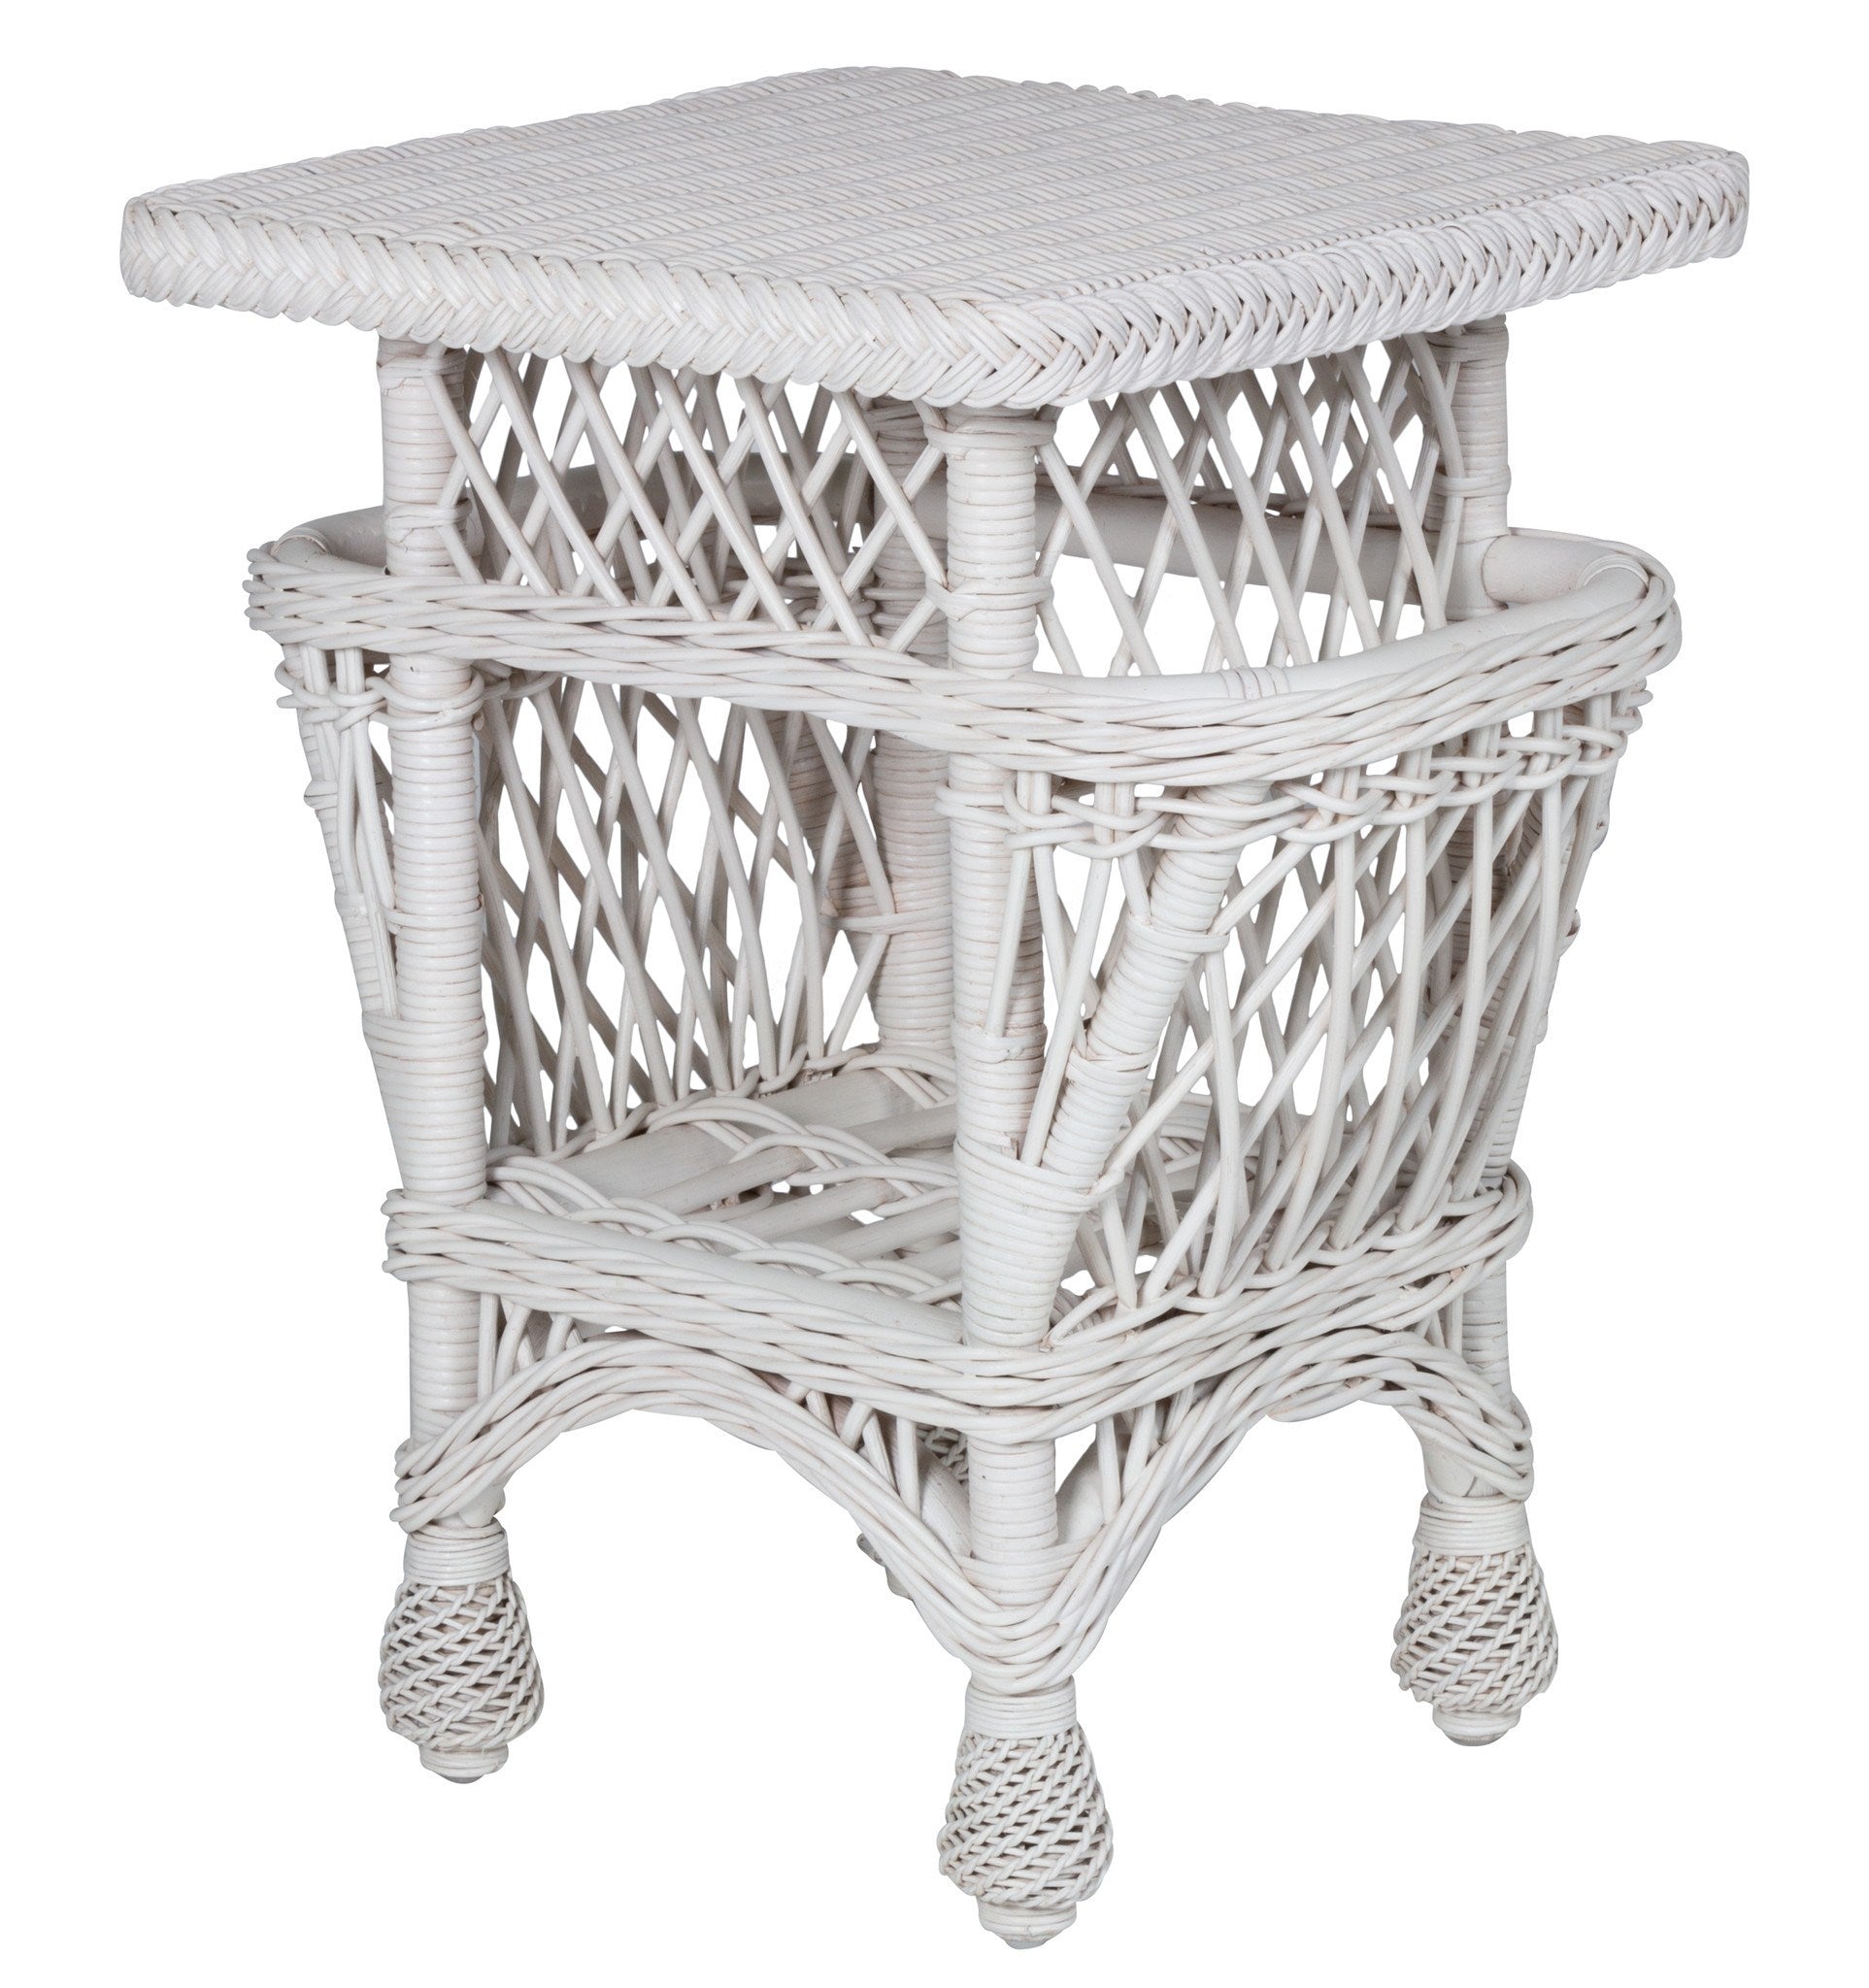 Designer Wicker & Rattan By Tribor Harbor Front Accent Table With Pockets Accessory - Rattan Imports